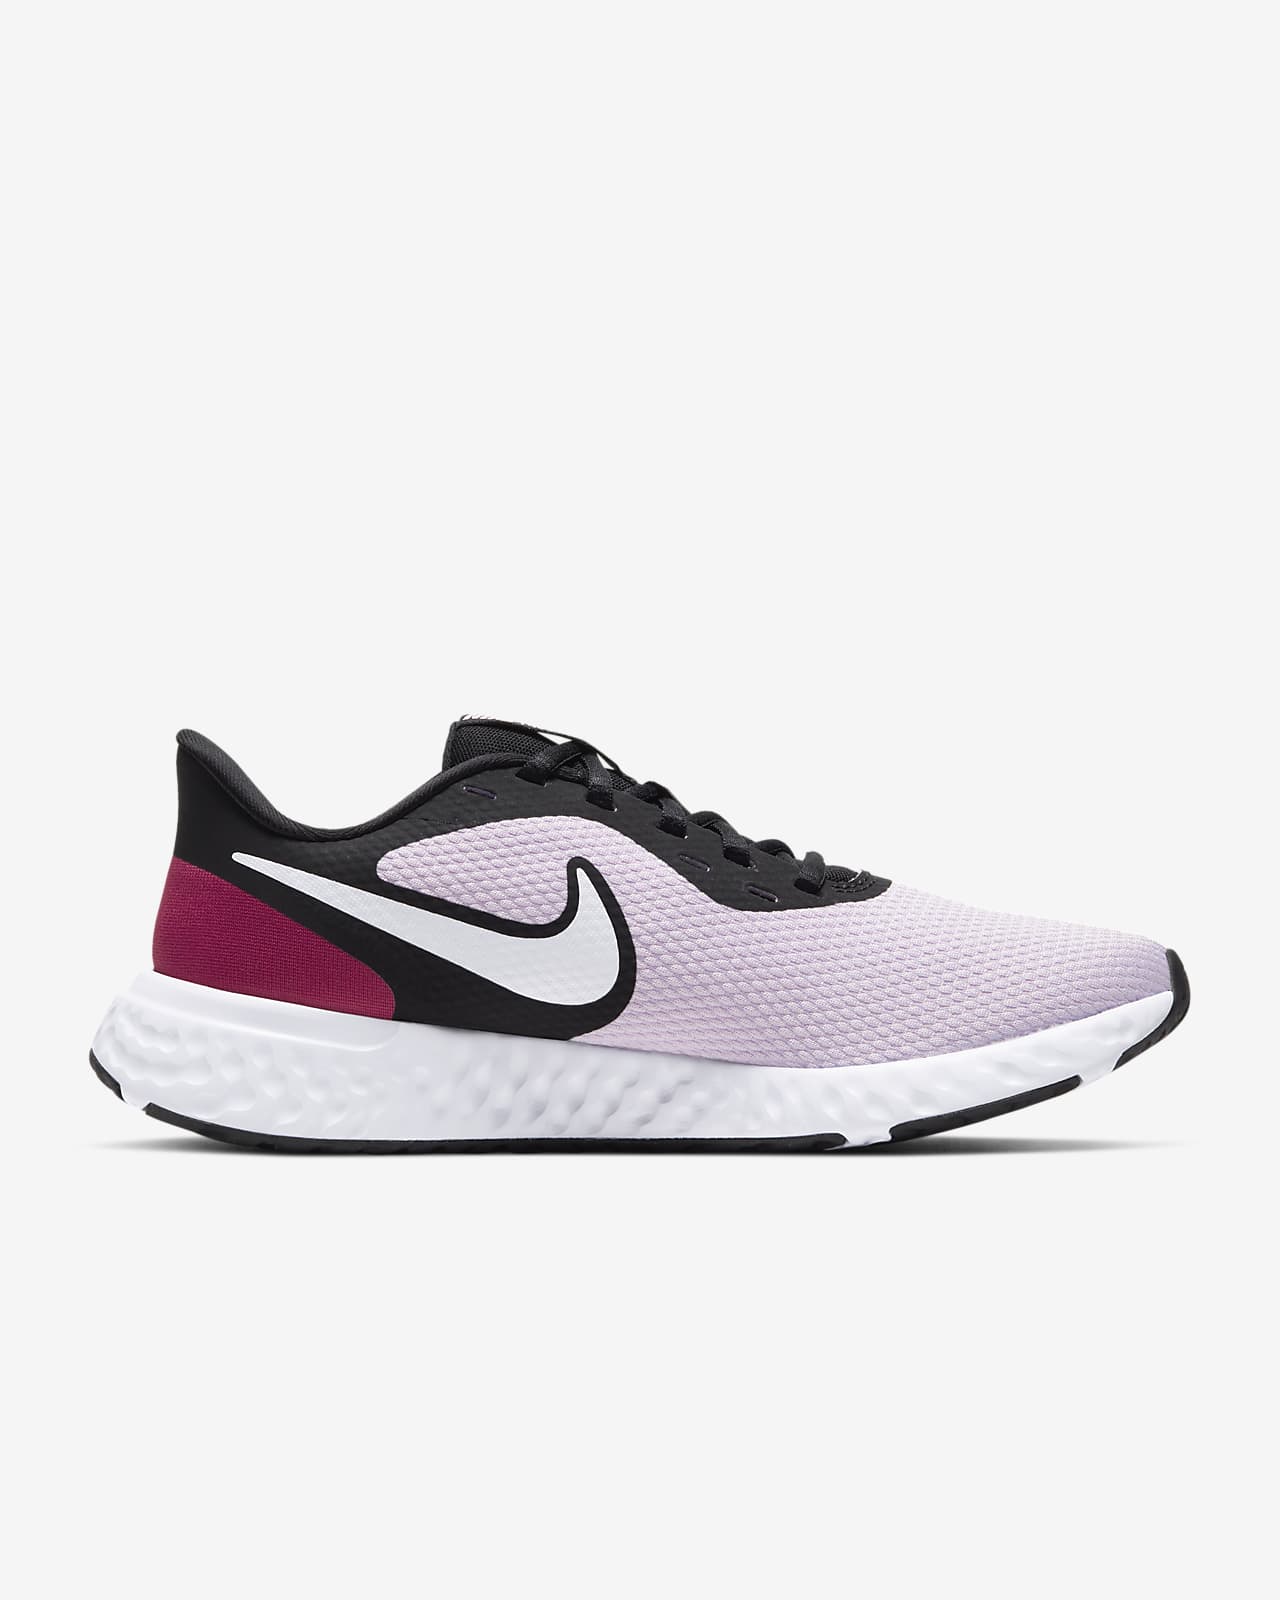 nike black and purple running shoes